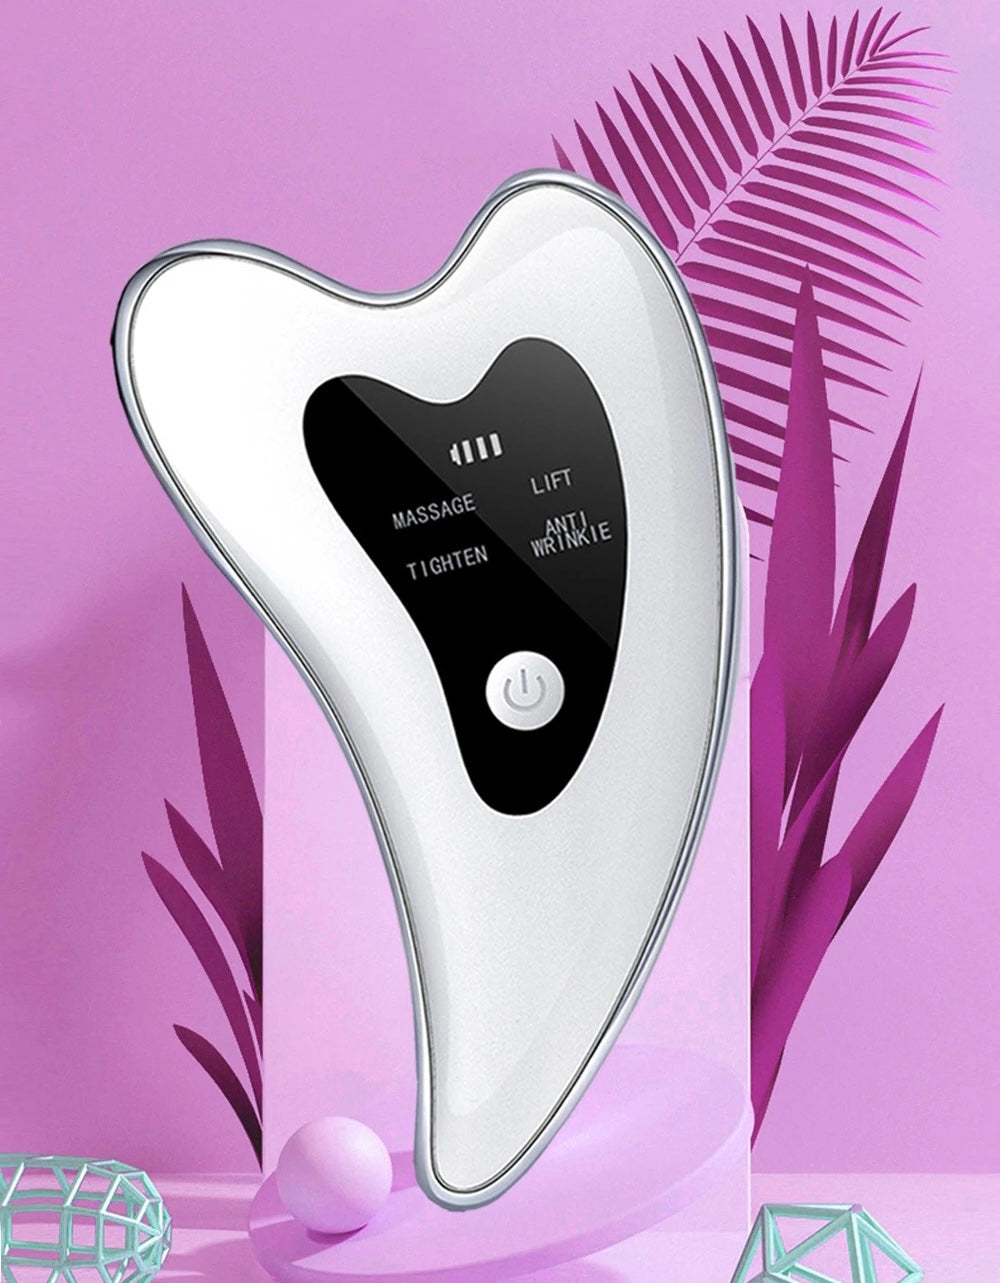 4 in 1 Electric Gua Sha Face Massager